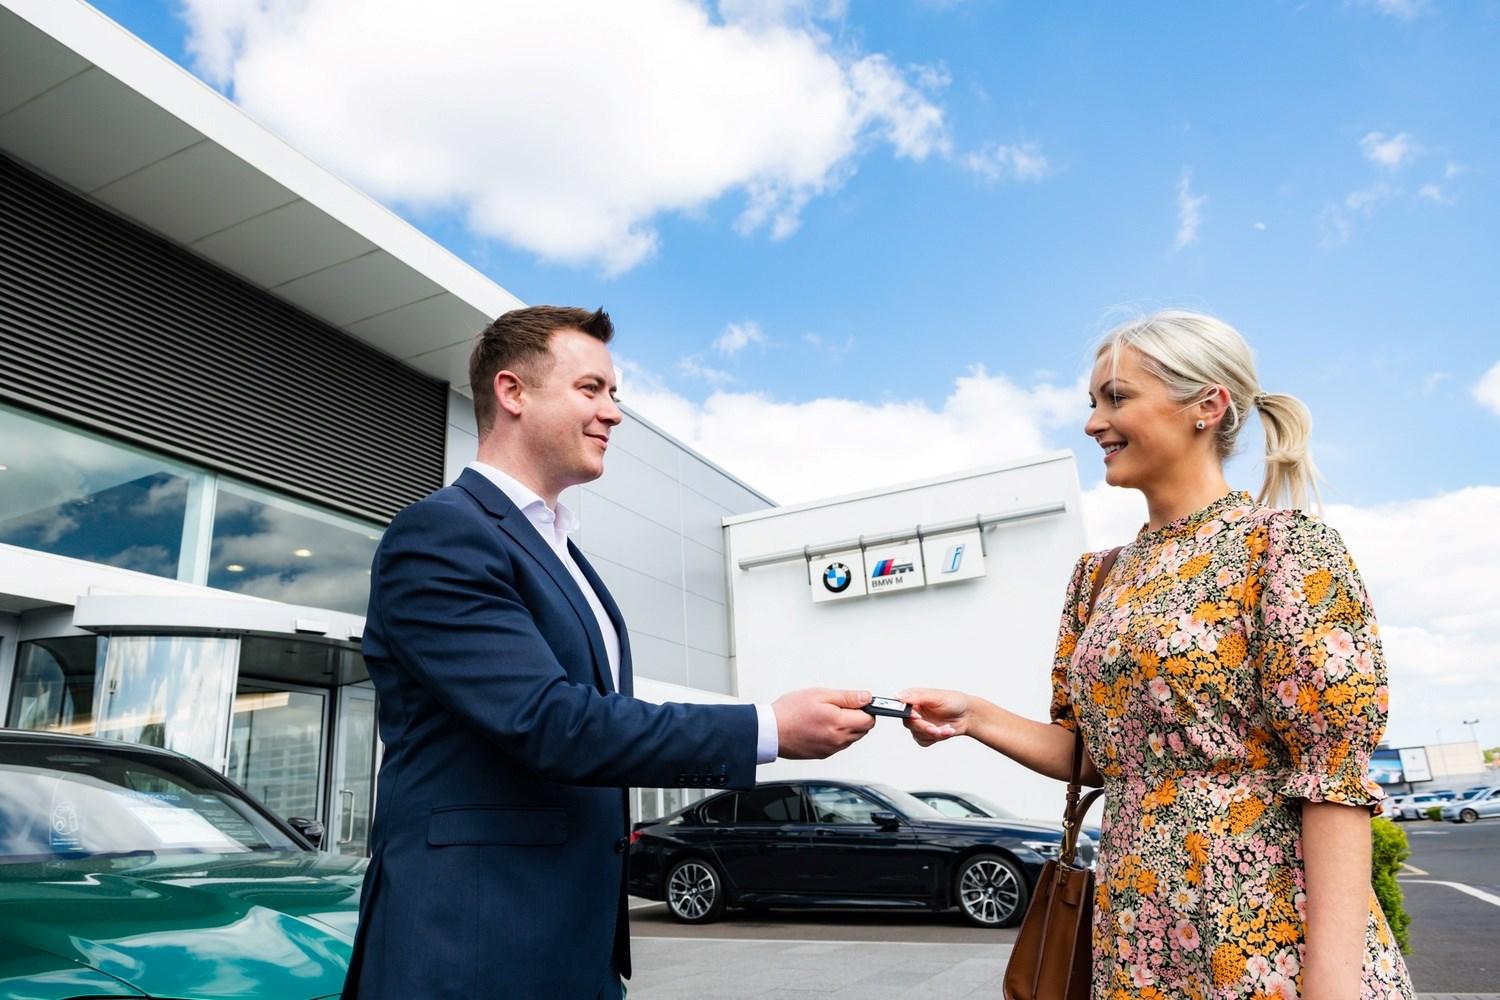 Bavarian BMW Sales Specialist talks hands over keys to customer to their new BMW outside of the Bavarian BMW showroom.